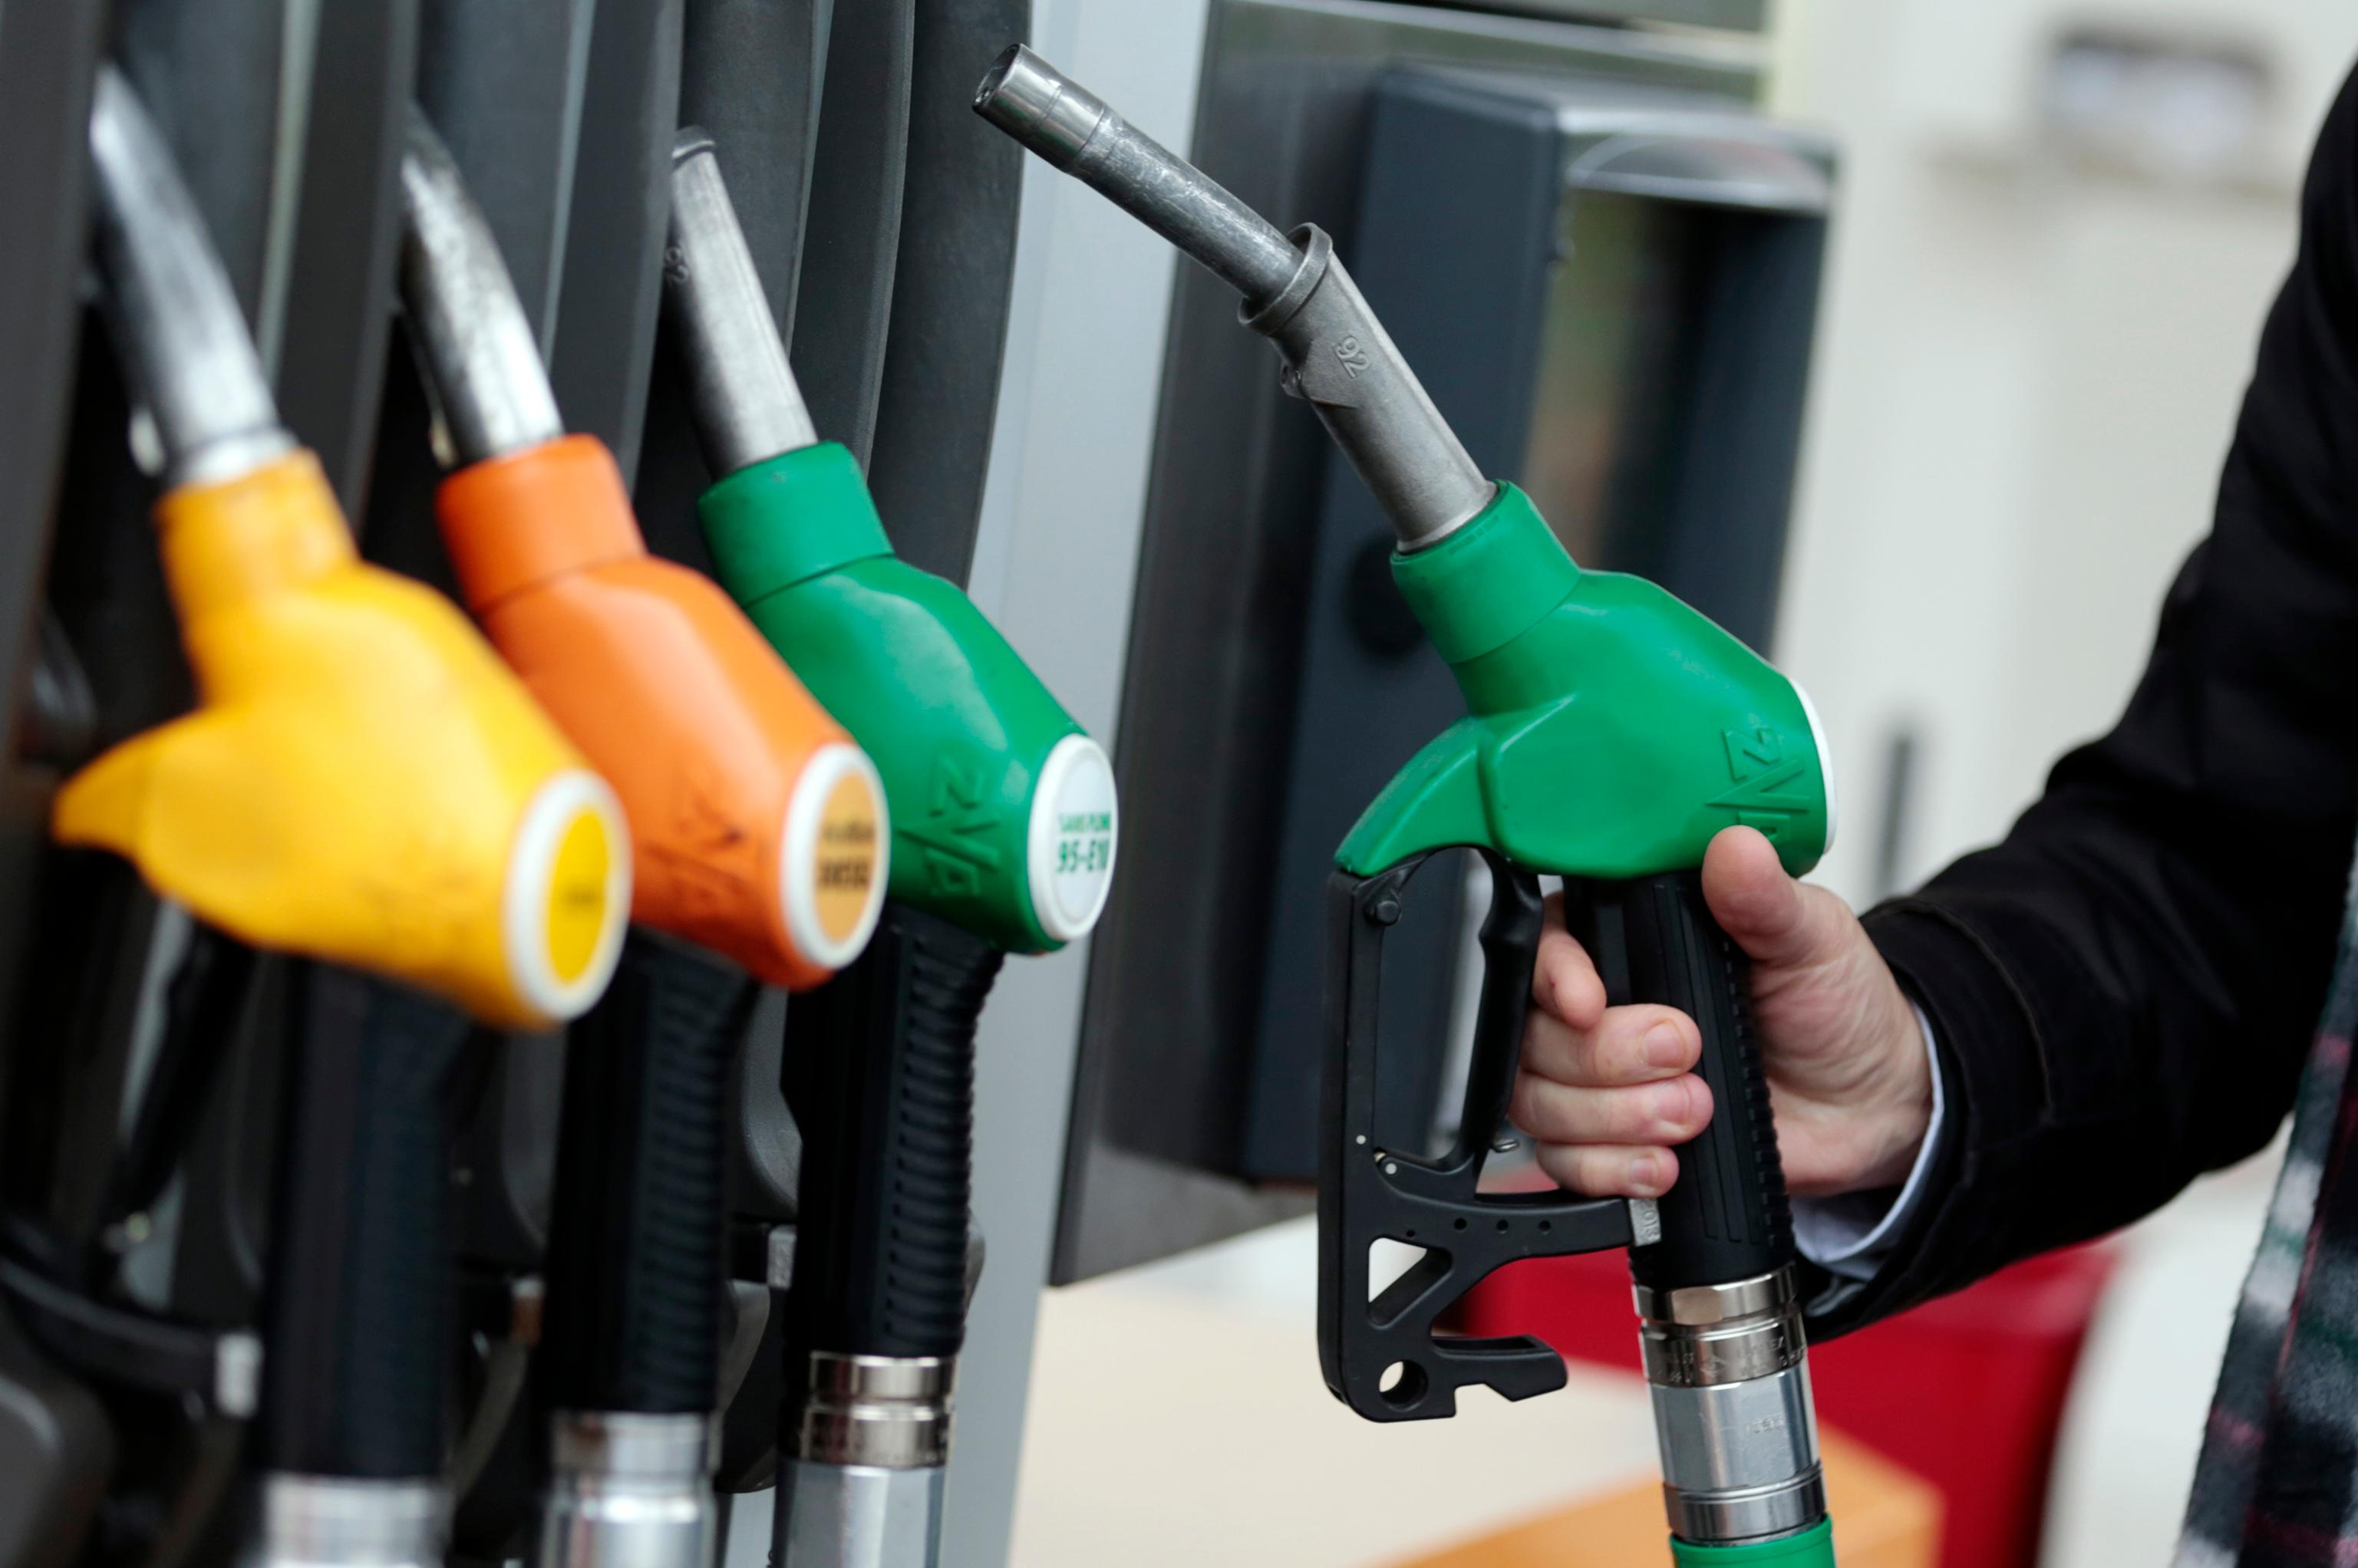 Govt cuts retail price of petrol and diesel even as crude price rises